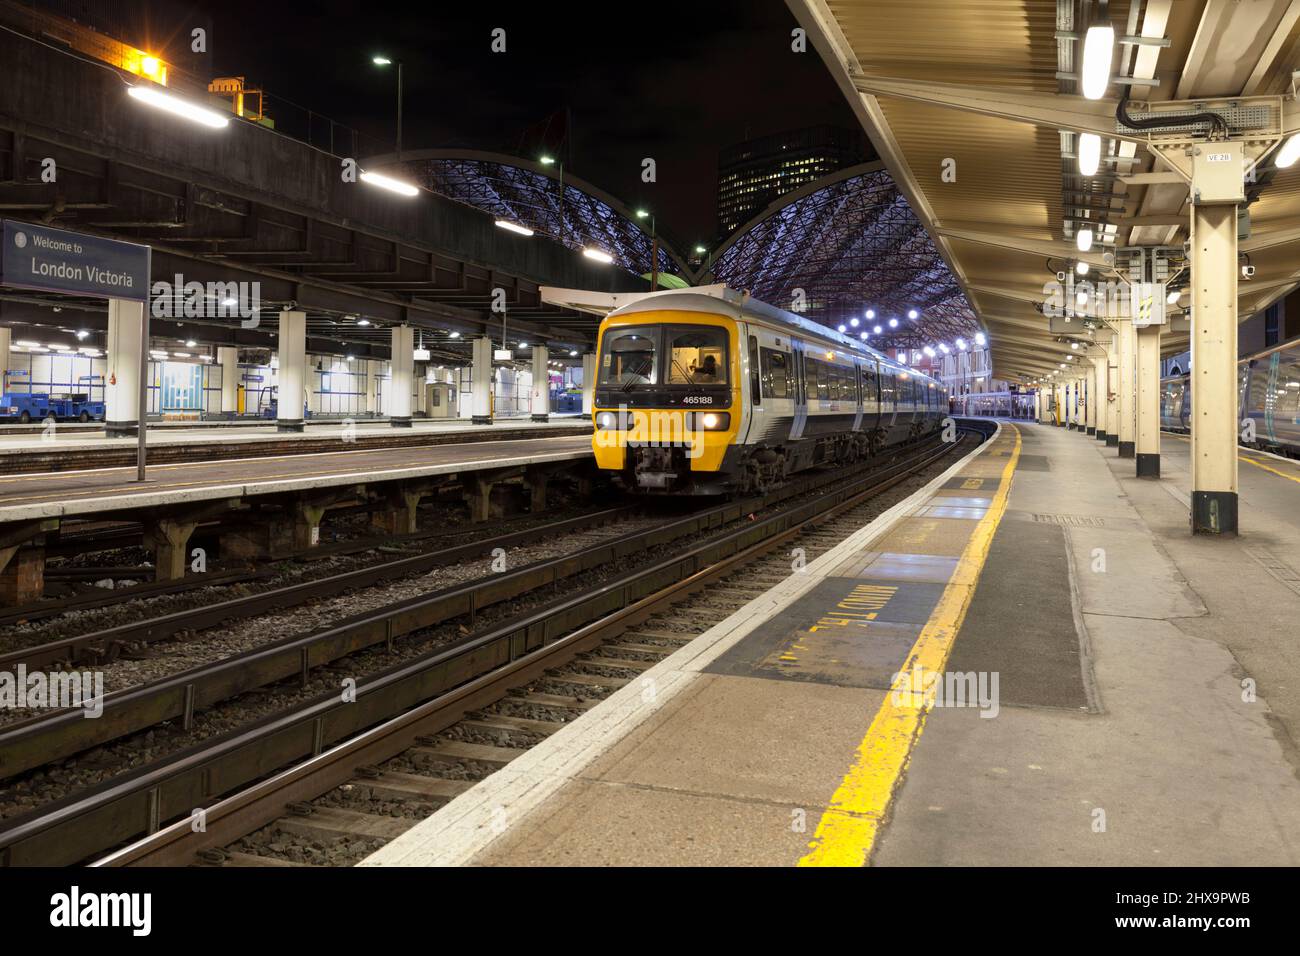 South Eastern trains class 465 third rail 750v DC electric train 465188 + 465190 at London Victoria railway station at night Stock Photo